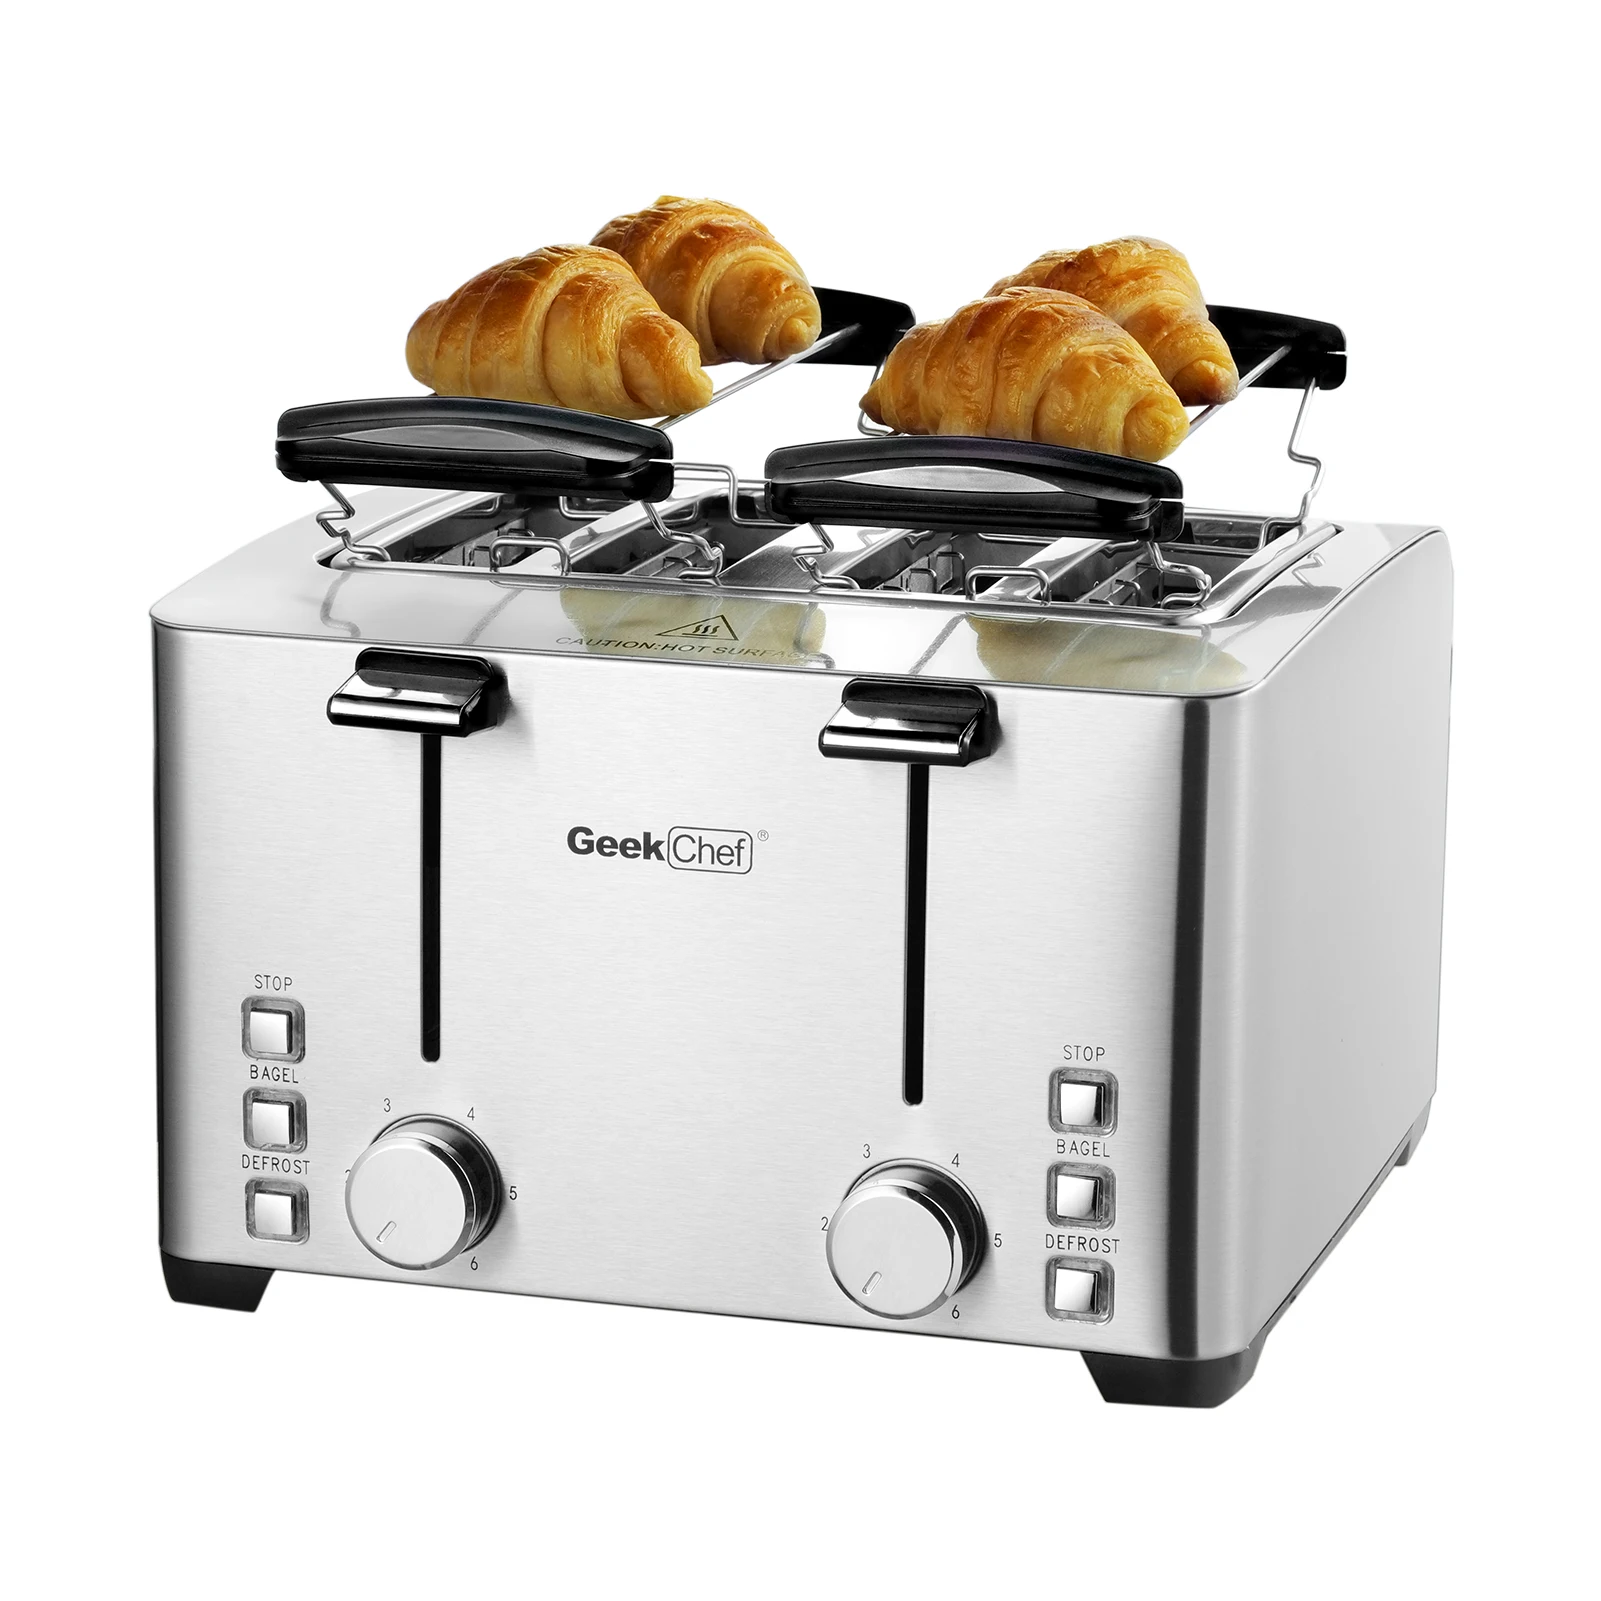 

Toaster 4 Slice, Geek Chef Stainless Steel Extra-Wide Slot Toaster with Dual Control Panels of Bagel/Defrost/Cancel Function